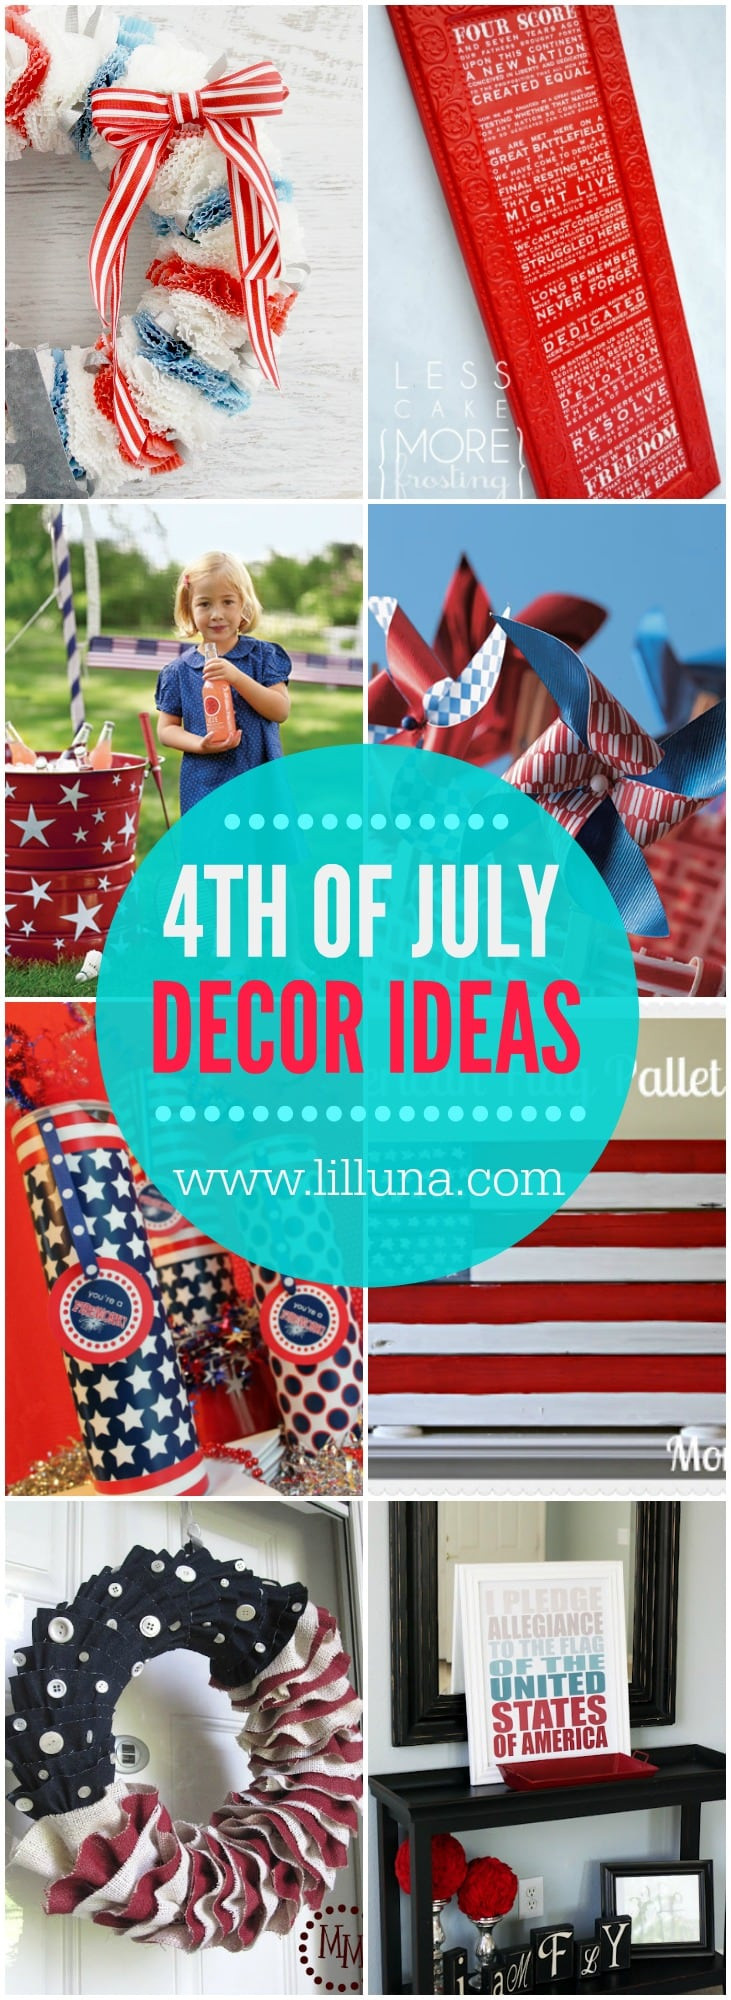 4th Of July Picture Ideas
 4th of July Decorations